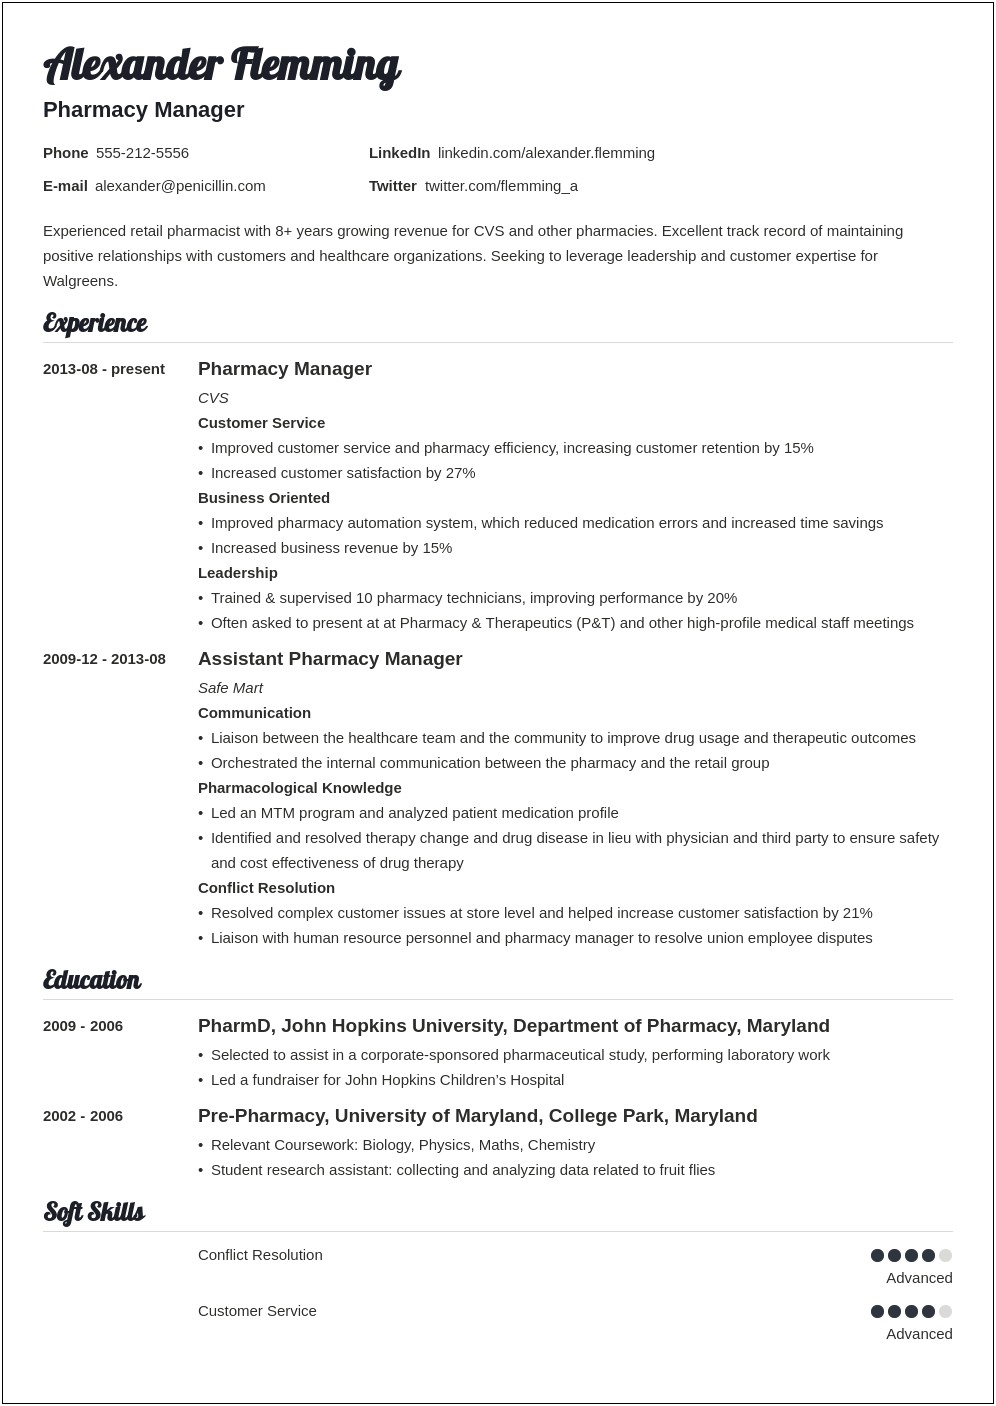 Best Resume Objective For Pharm D Candidate